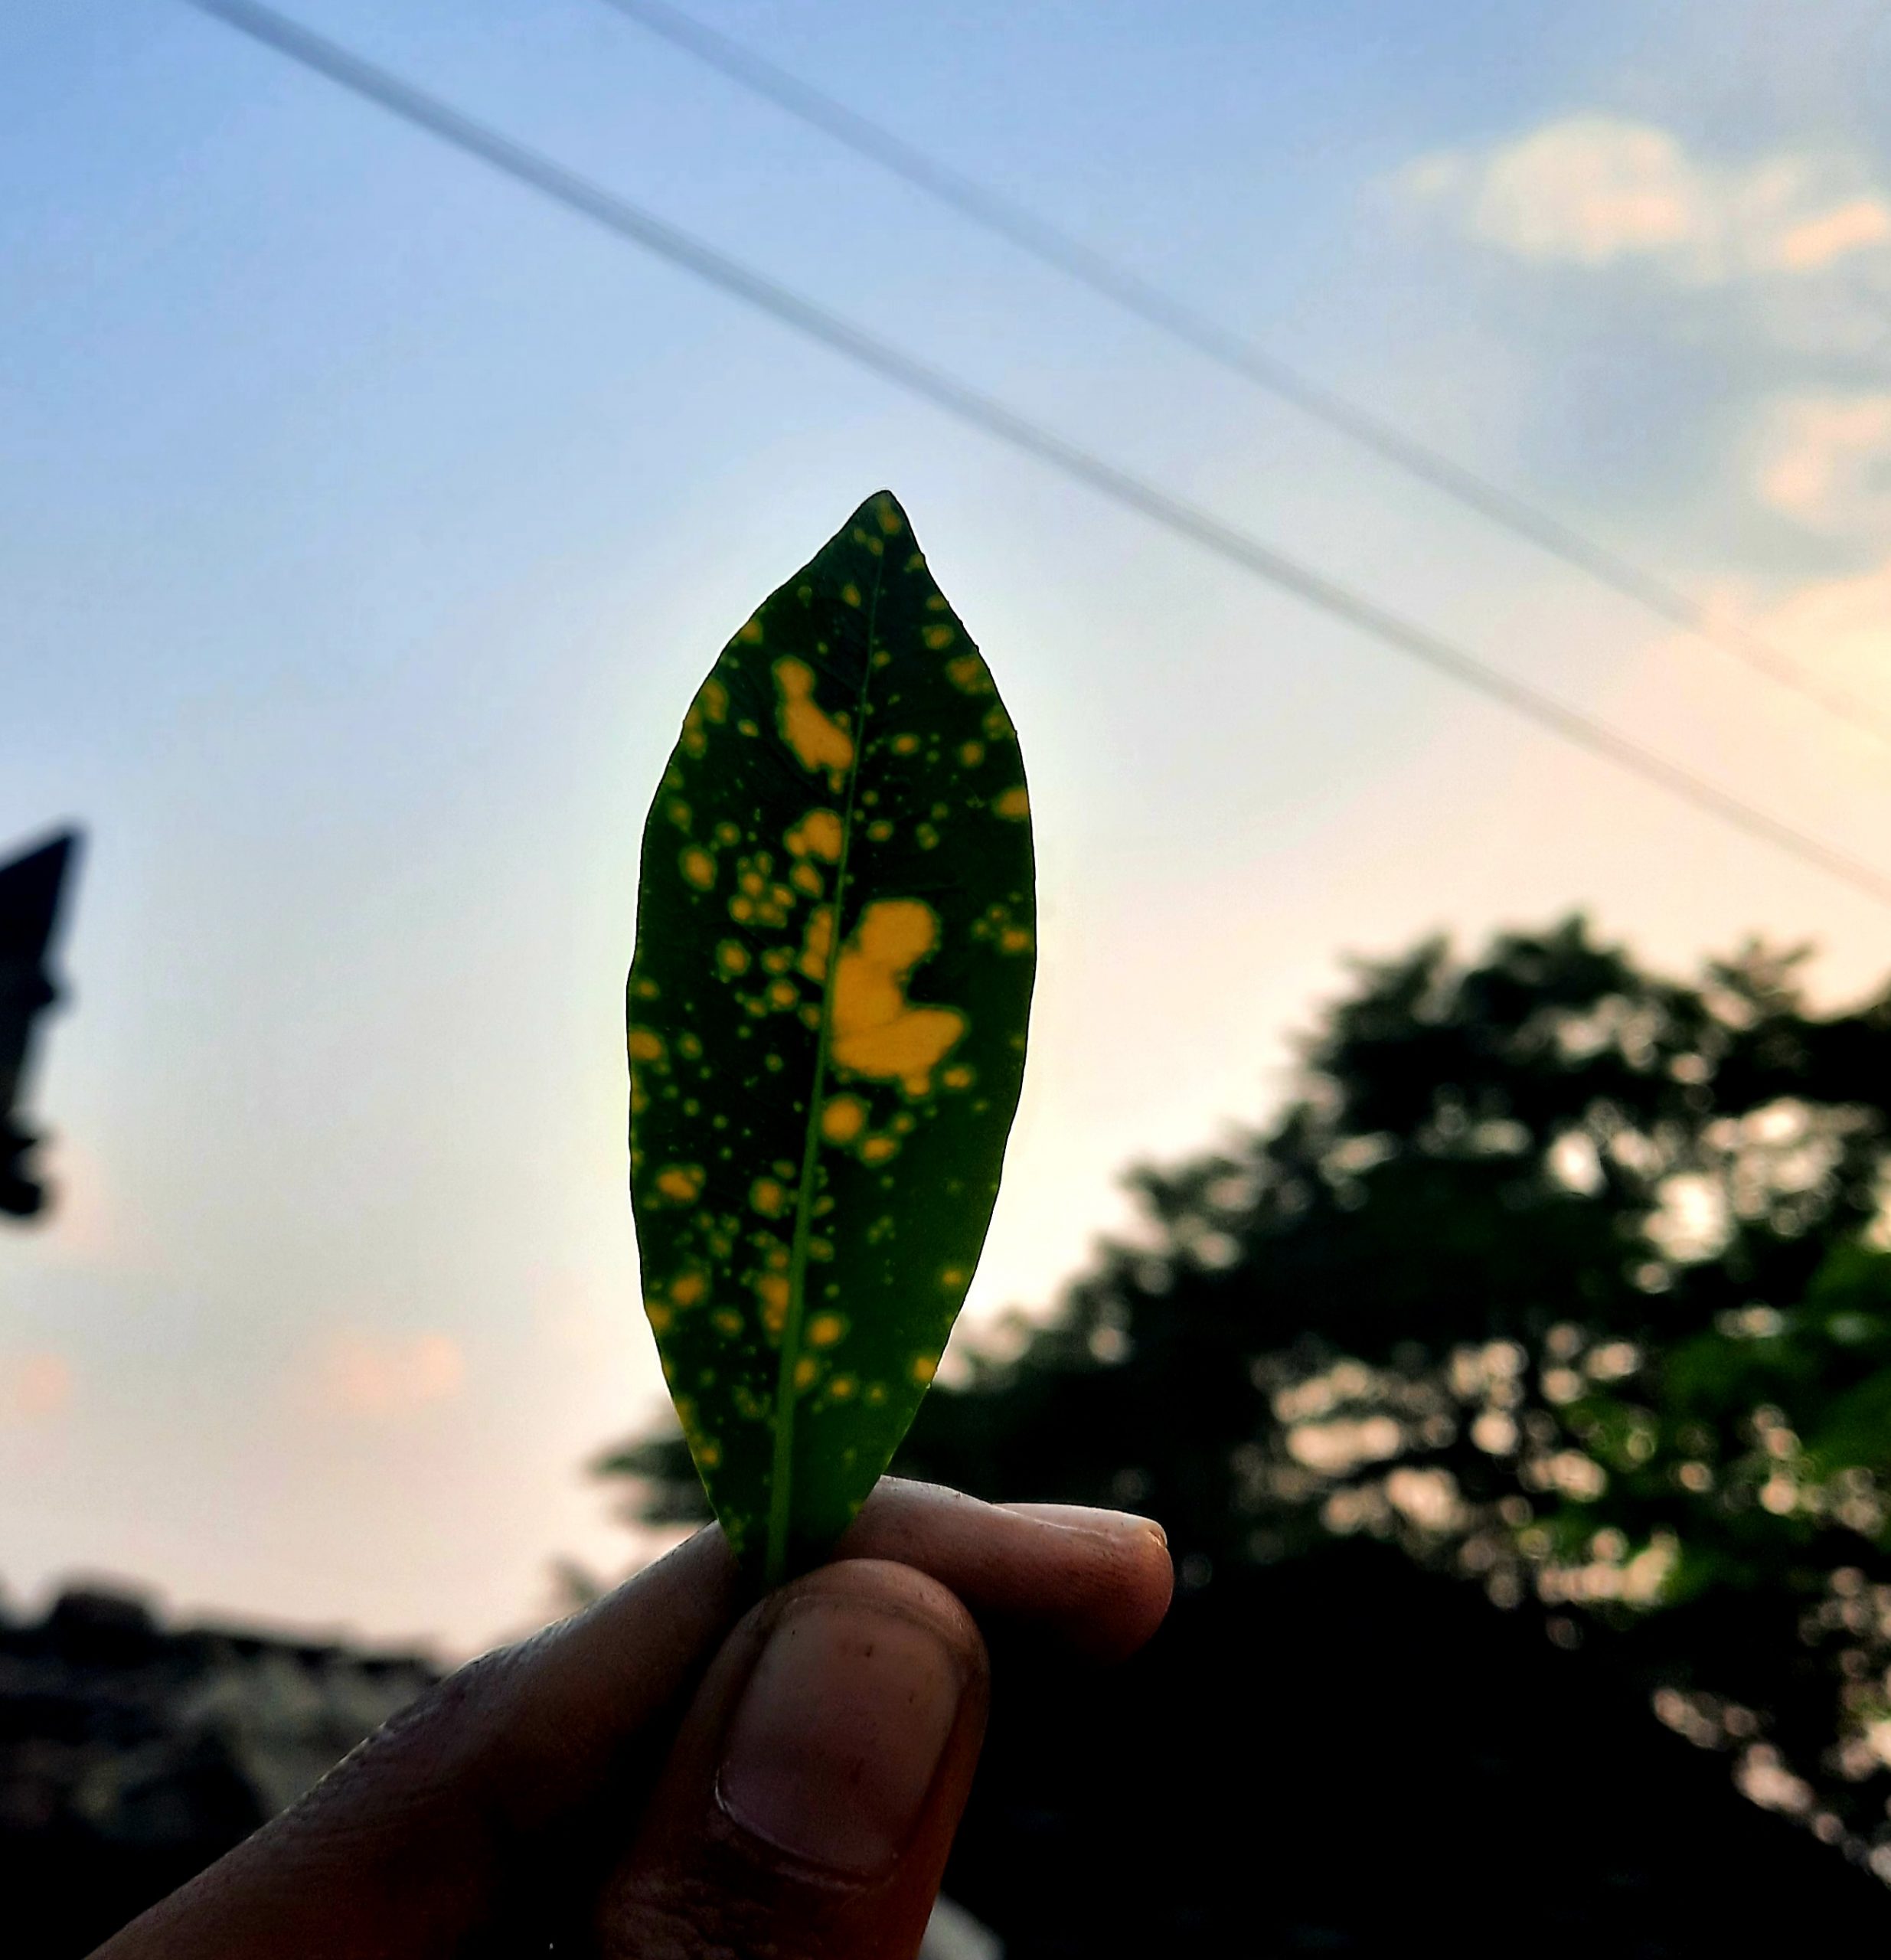 A leaf in hand